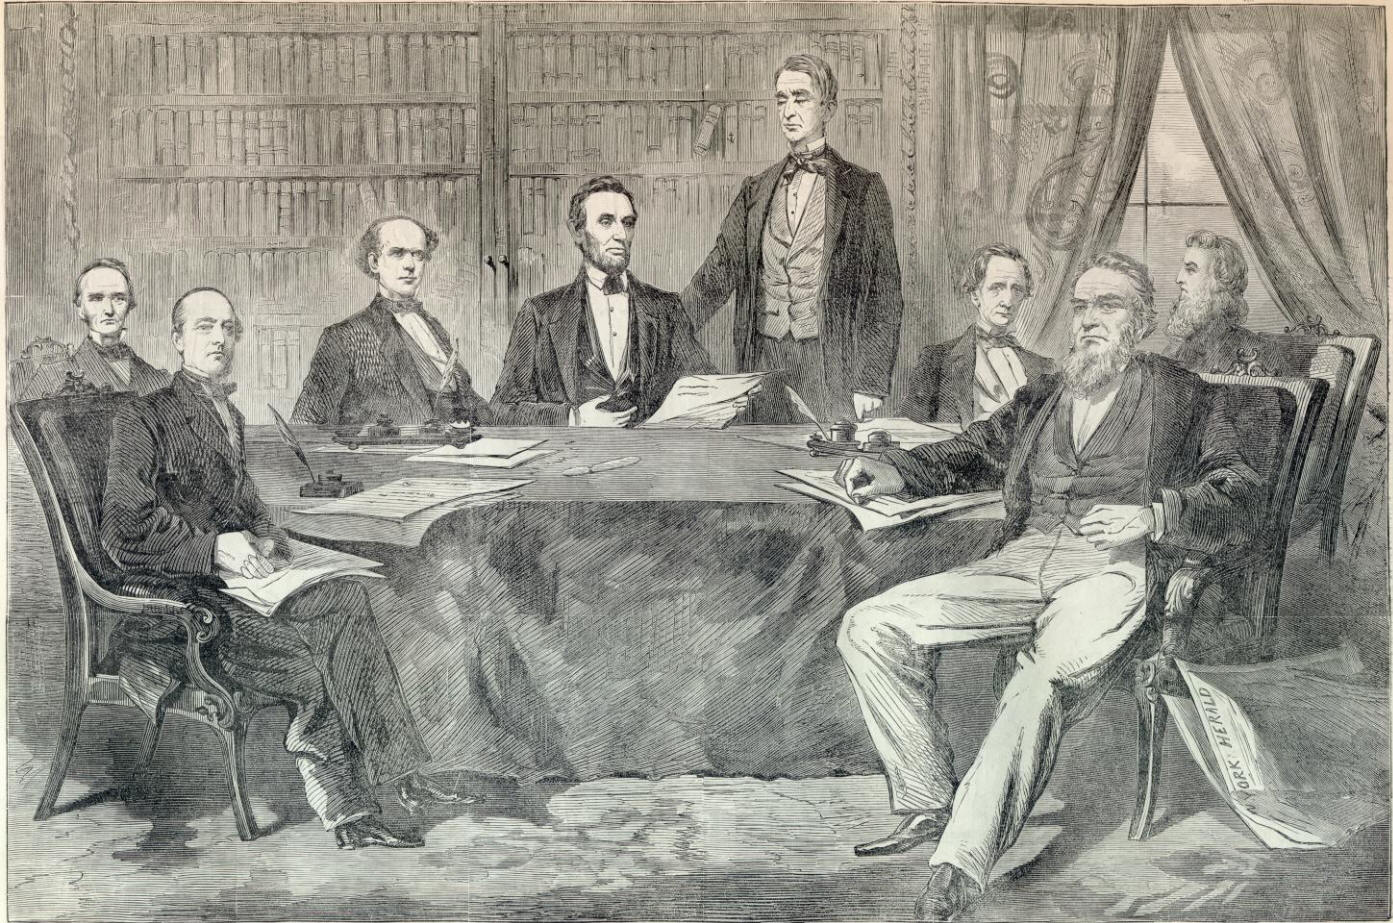 Abraham Lincoln's Cabinet